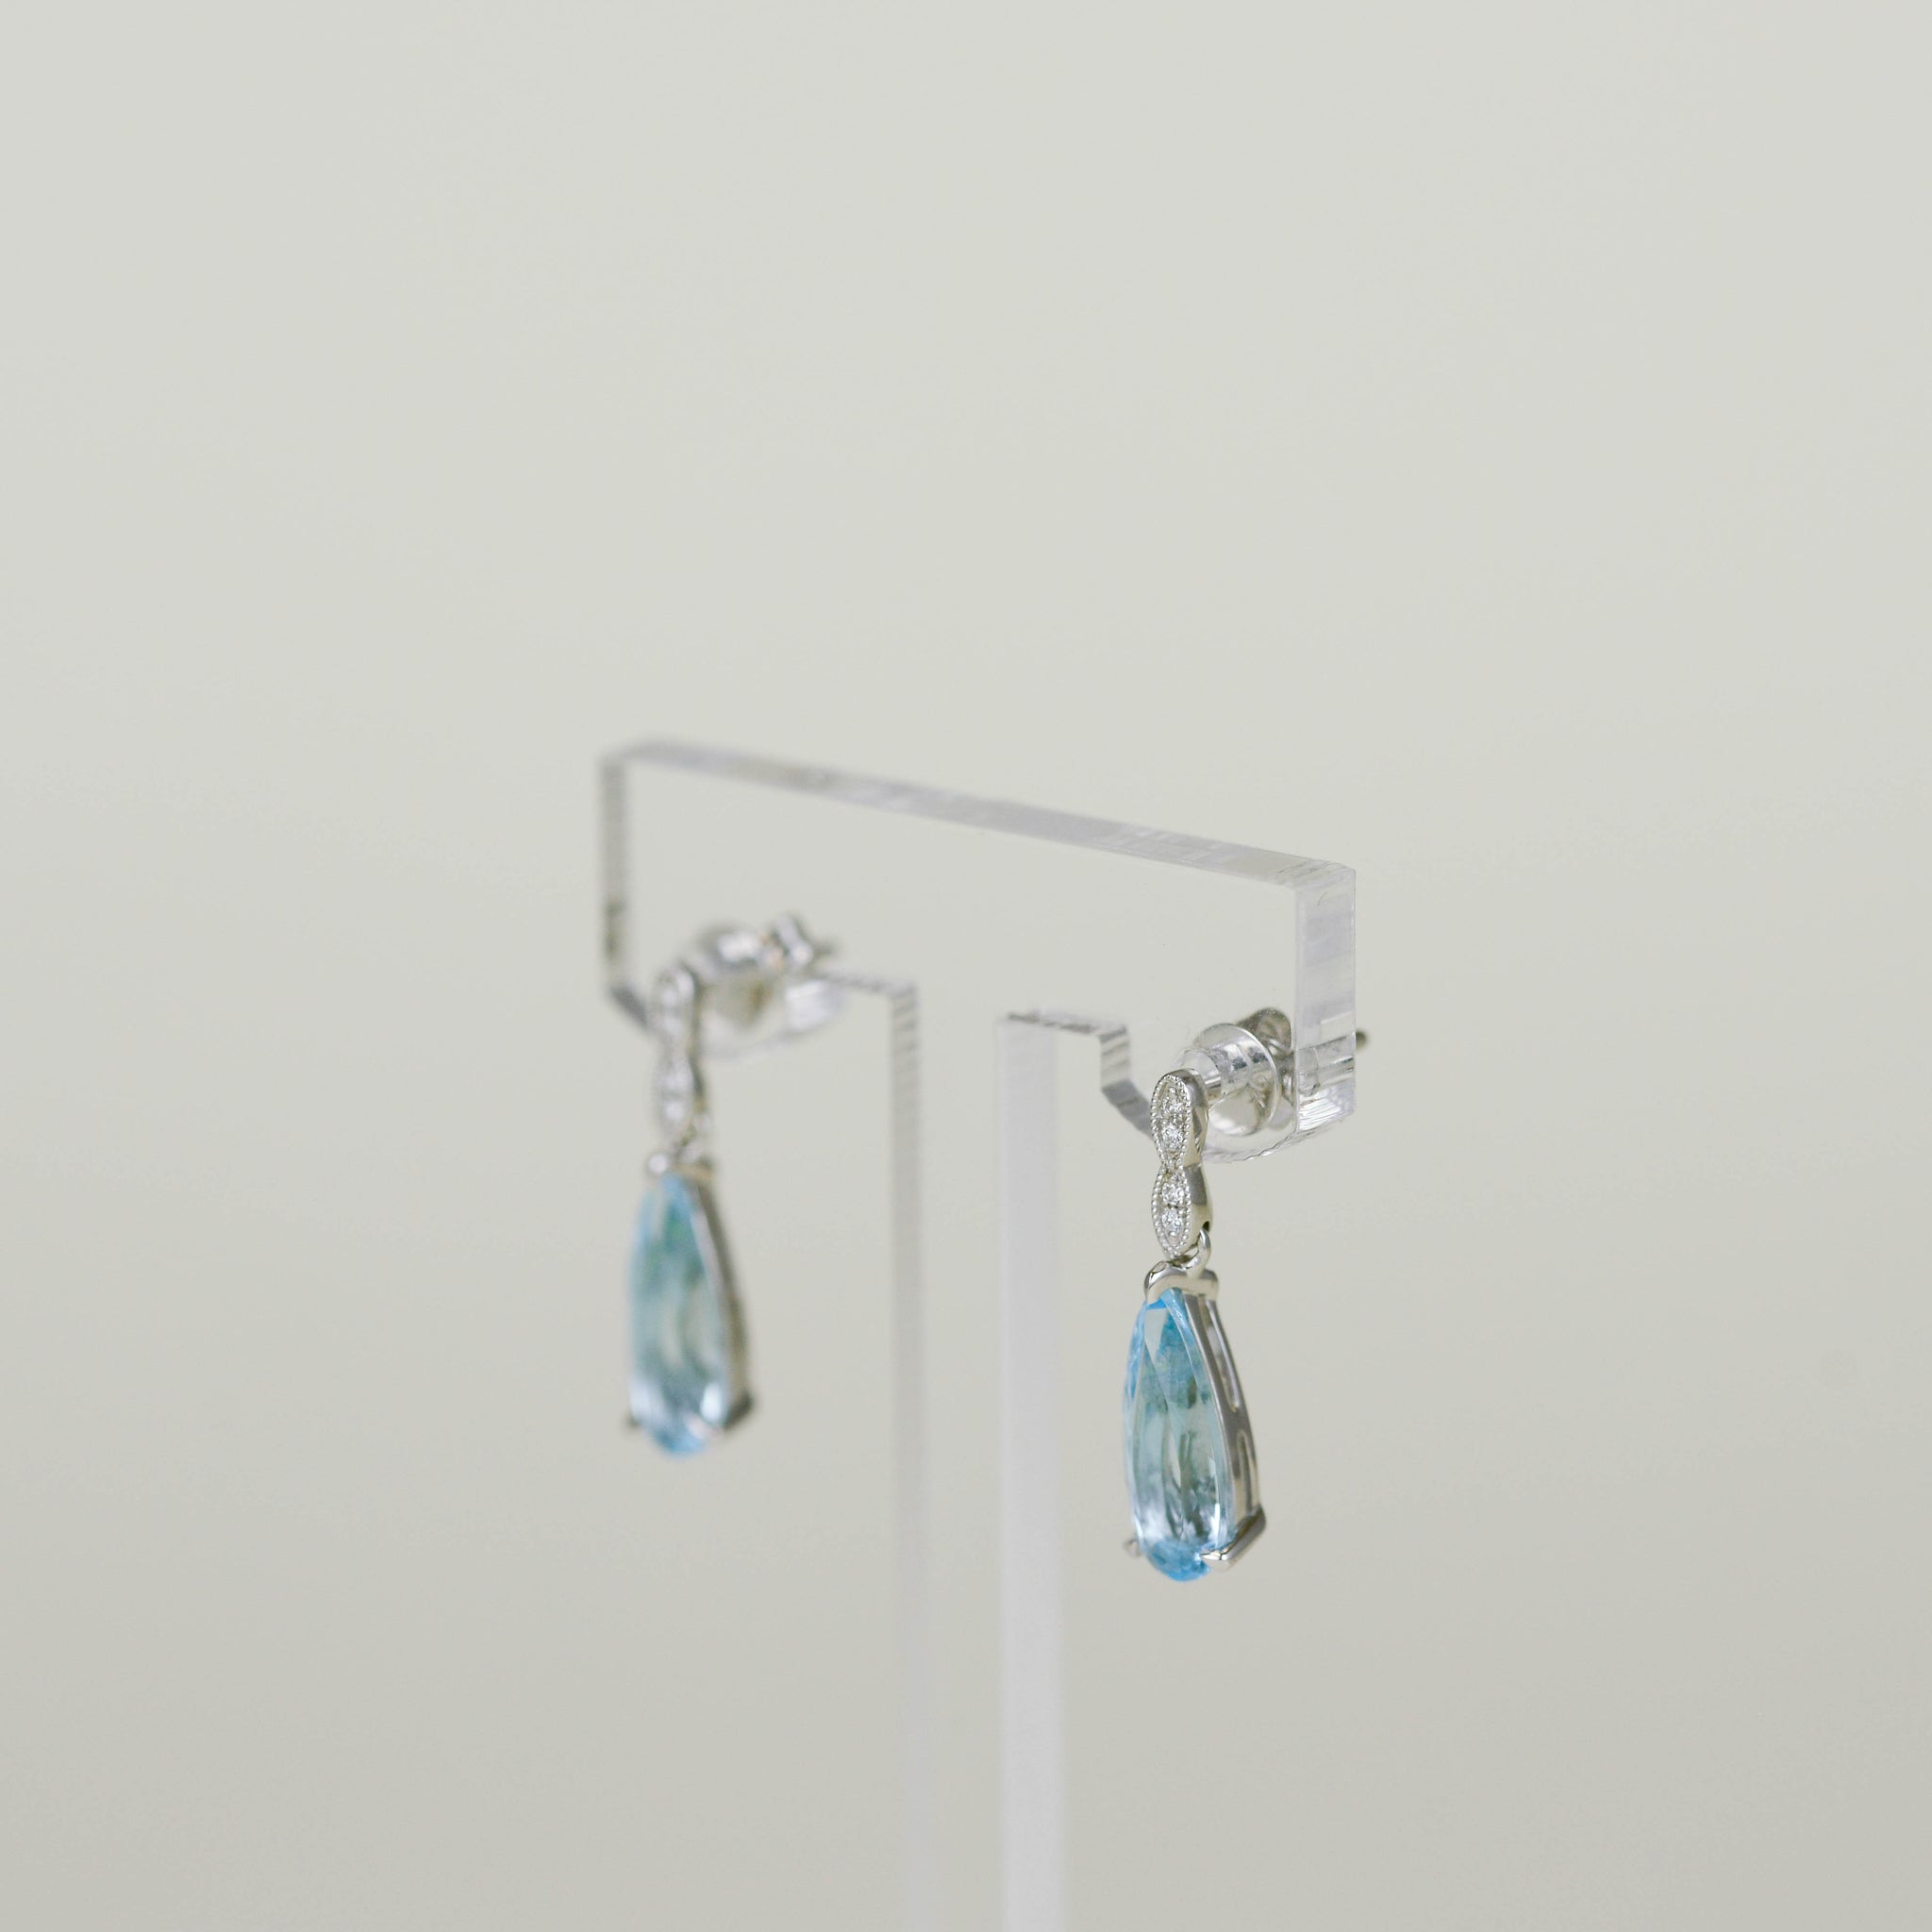 9ct White Gold 2.83ct Elongated Pear Cut Blue Topaz and Diamond Drop Earrings